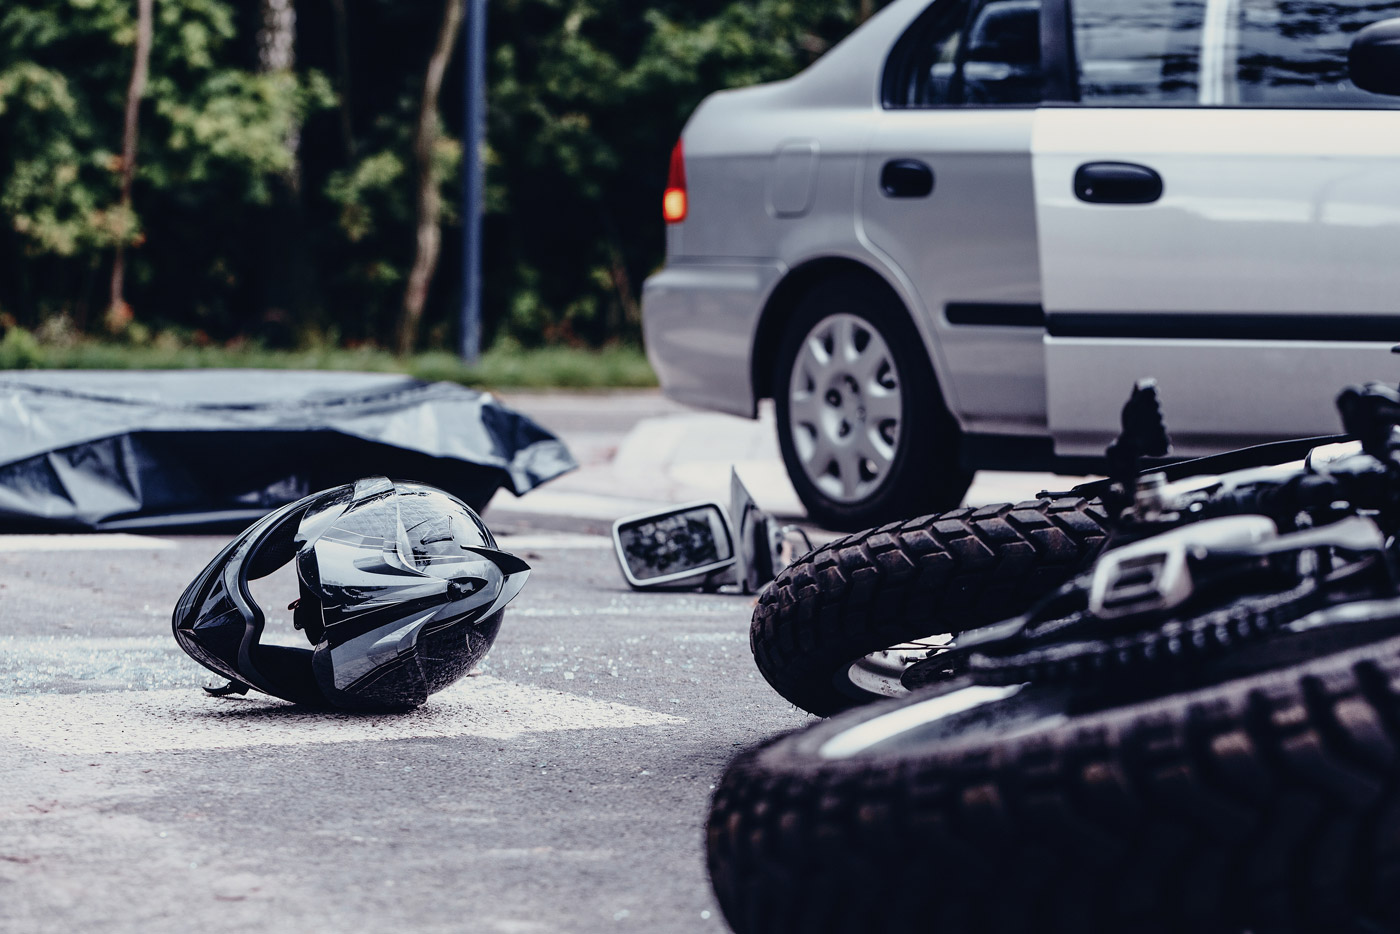 Motorcycle and car collision accident